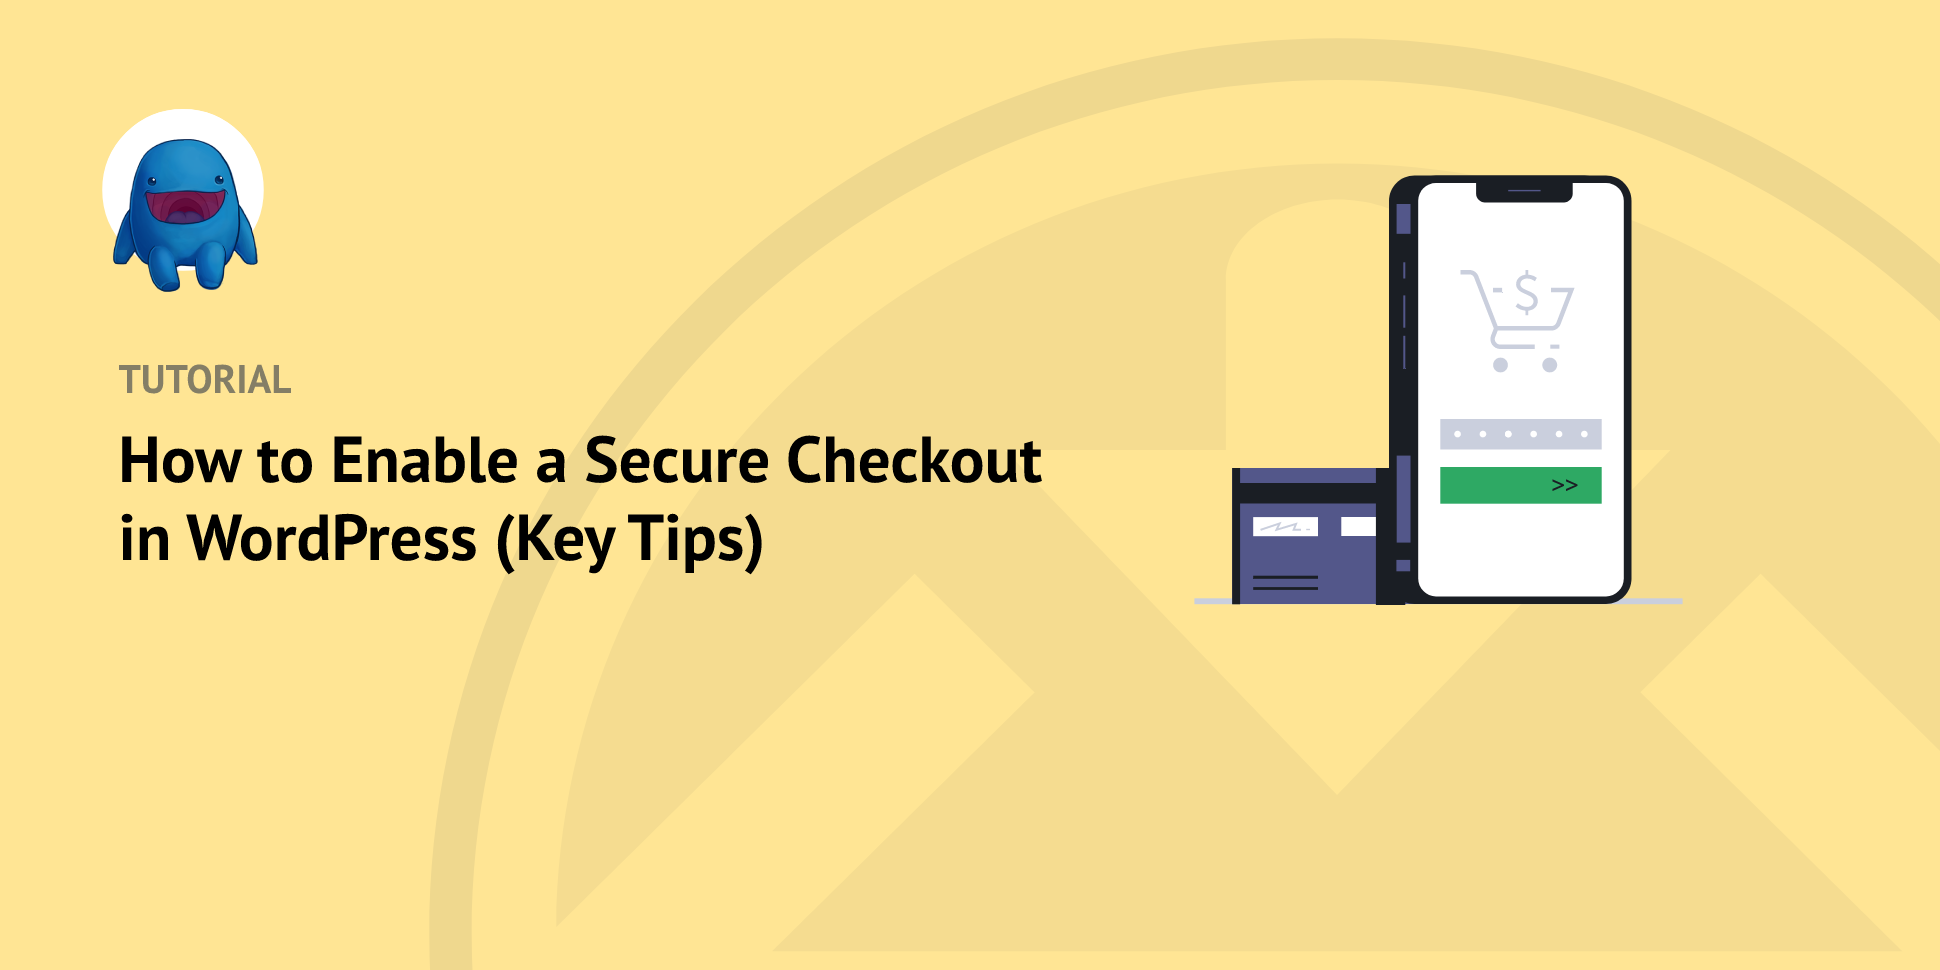 How to Enable Secure Checkout WordPress Processes